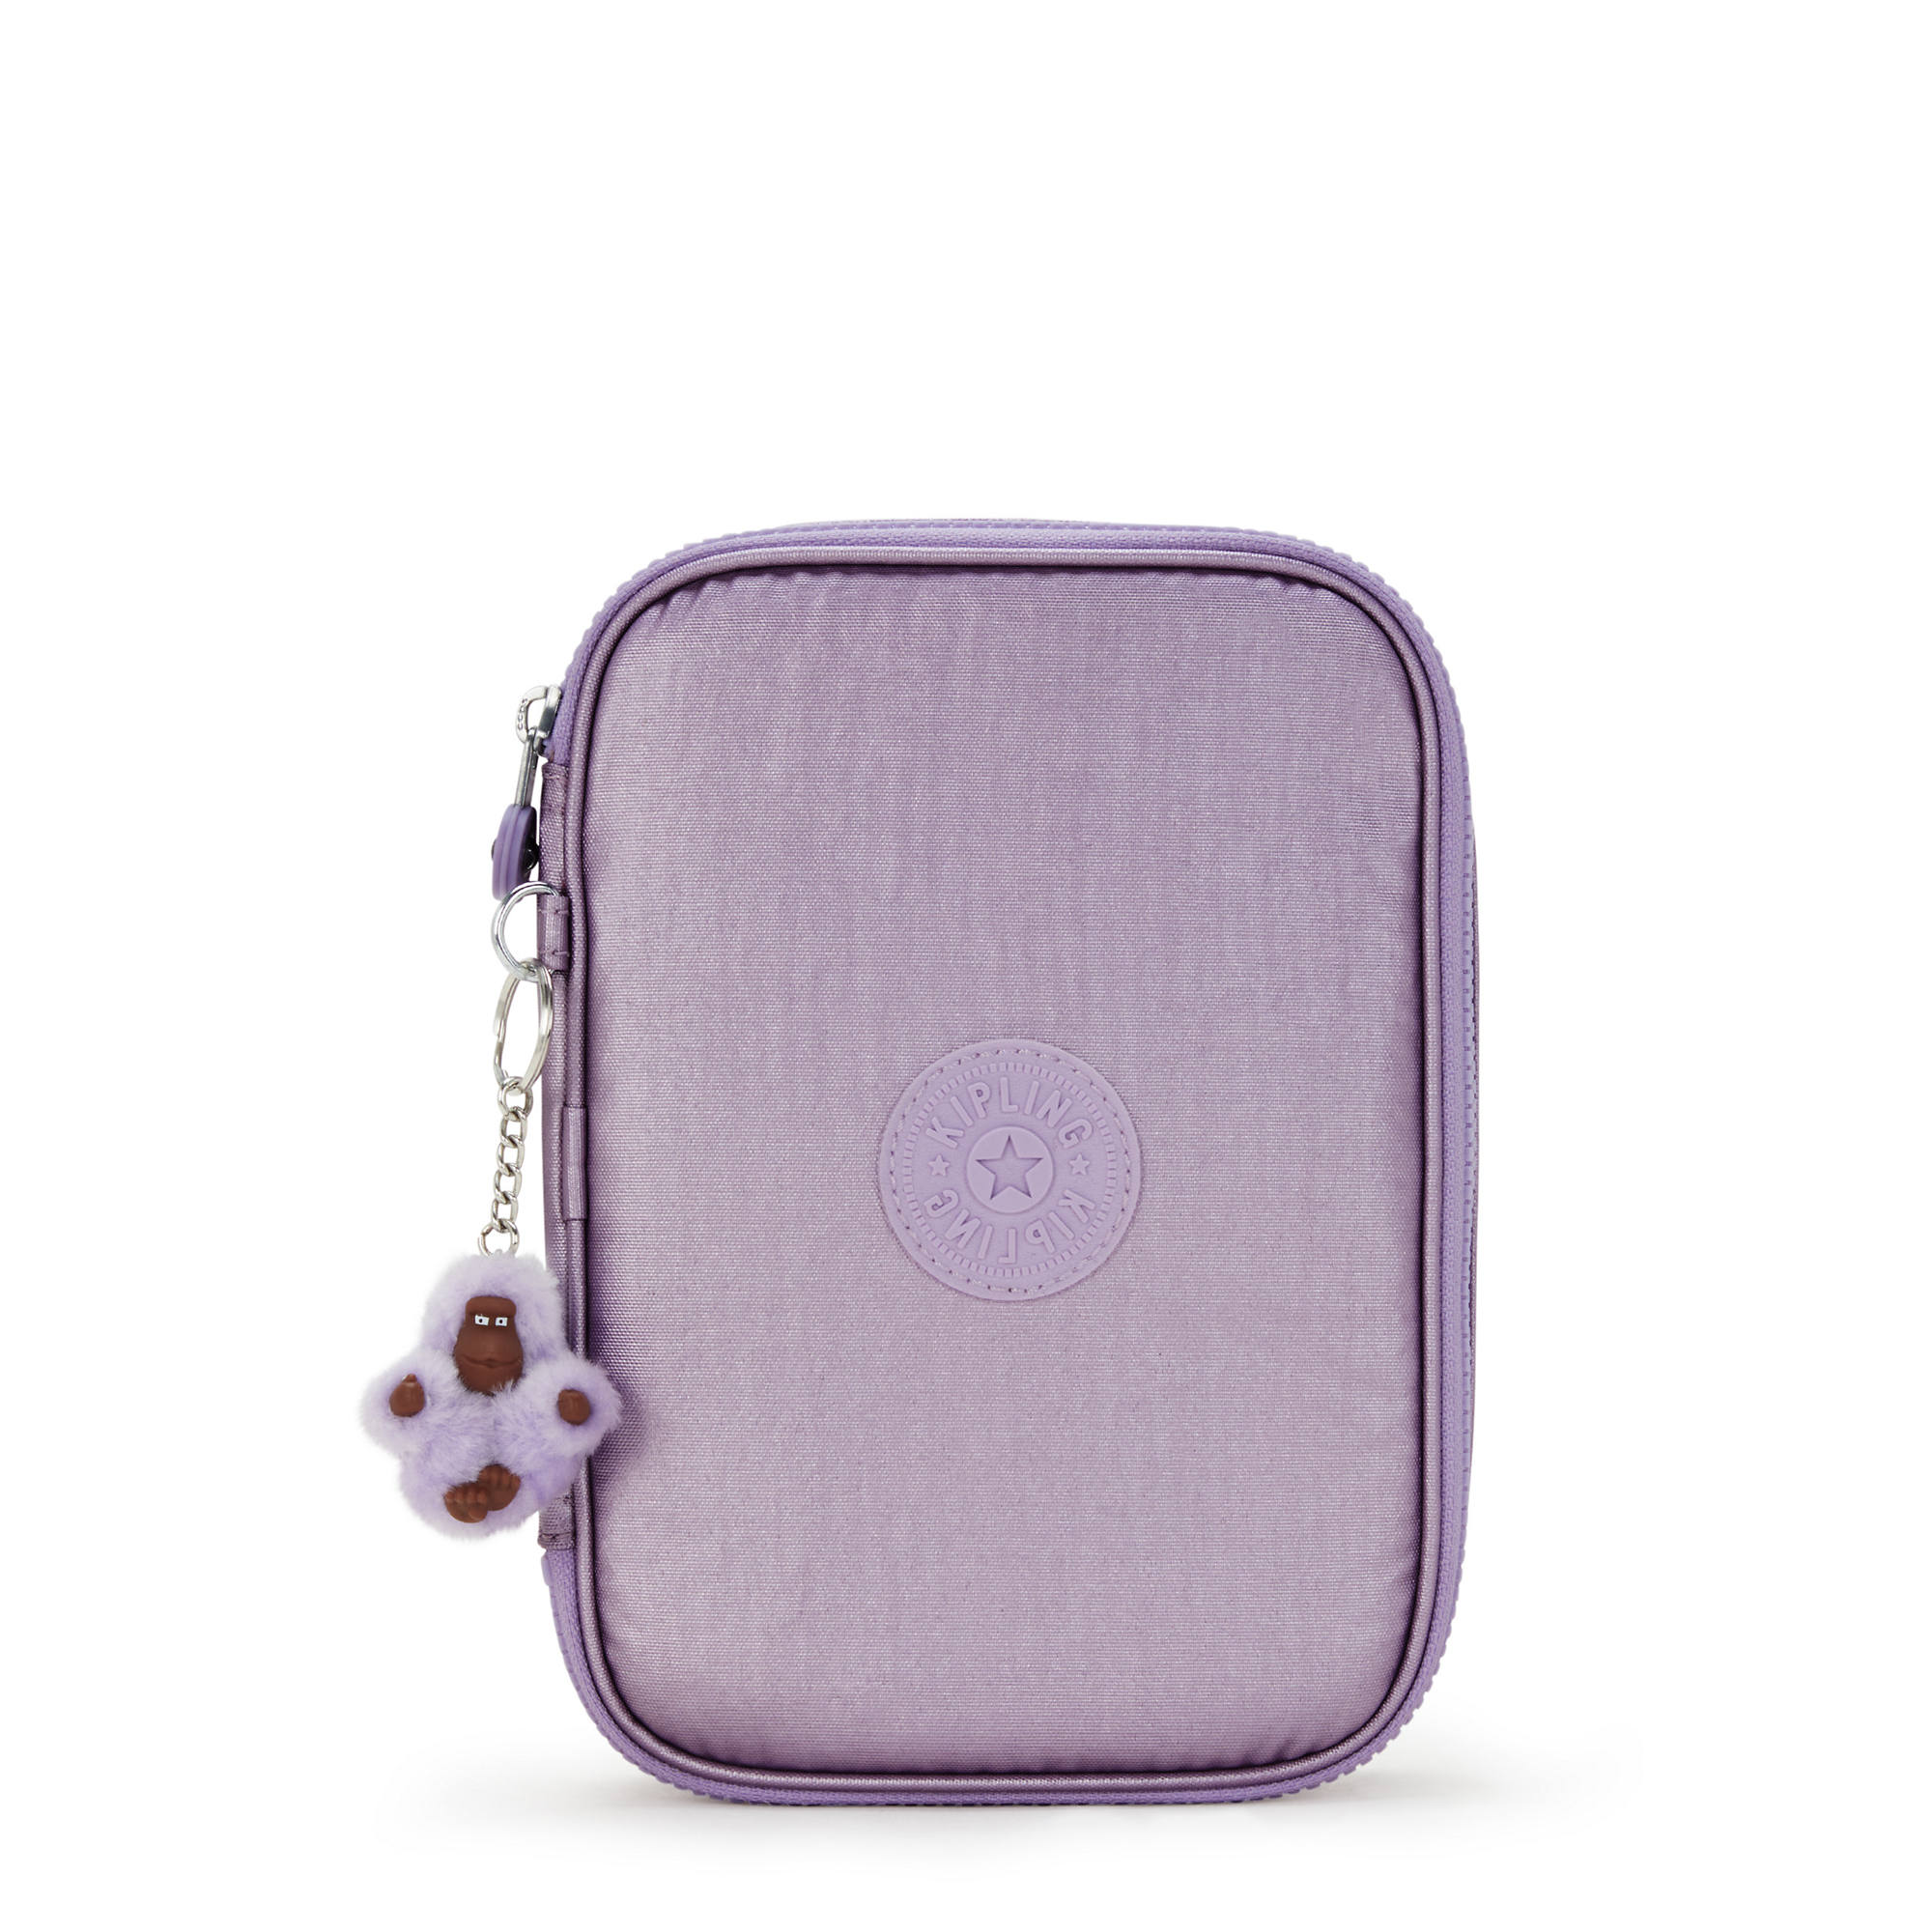 Emily Pencil Pouch Pink and Purple Floral 